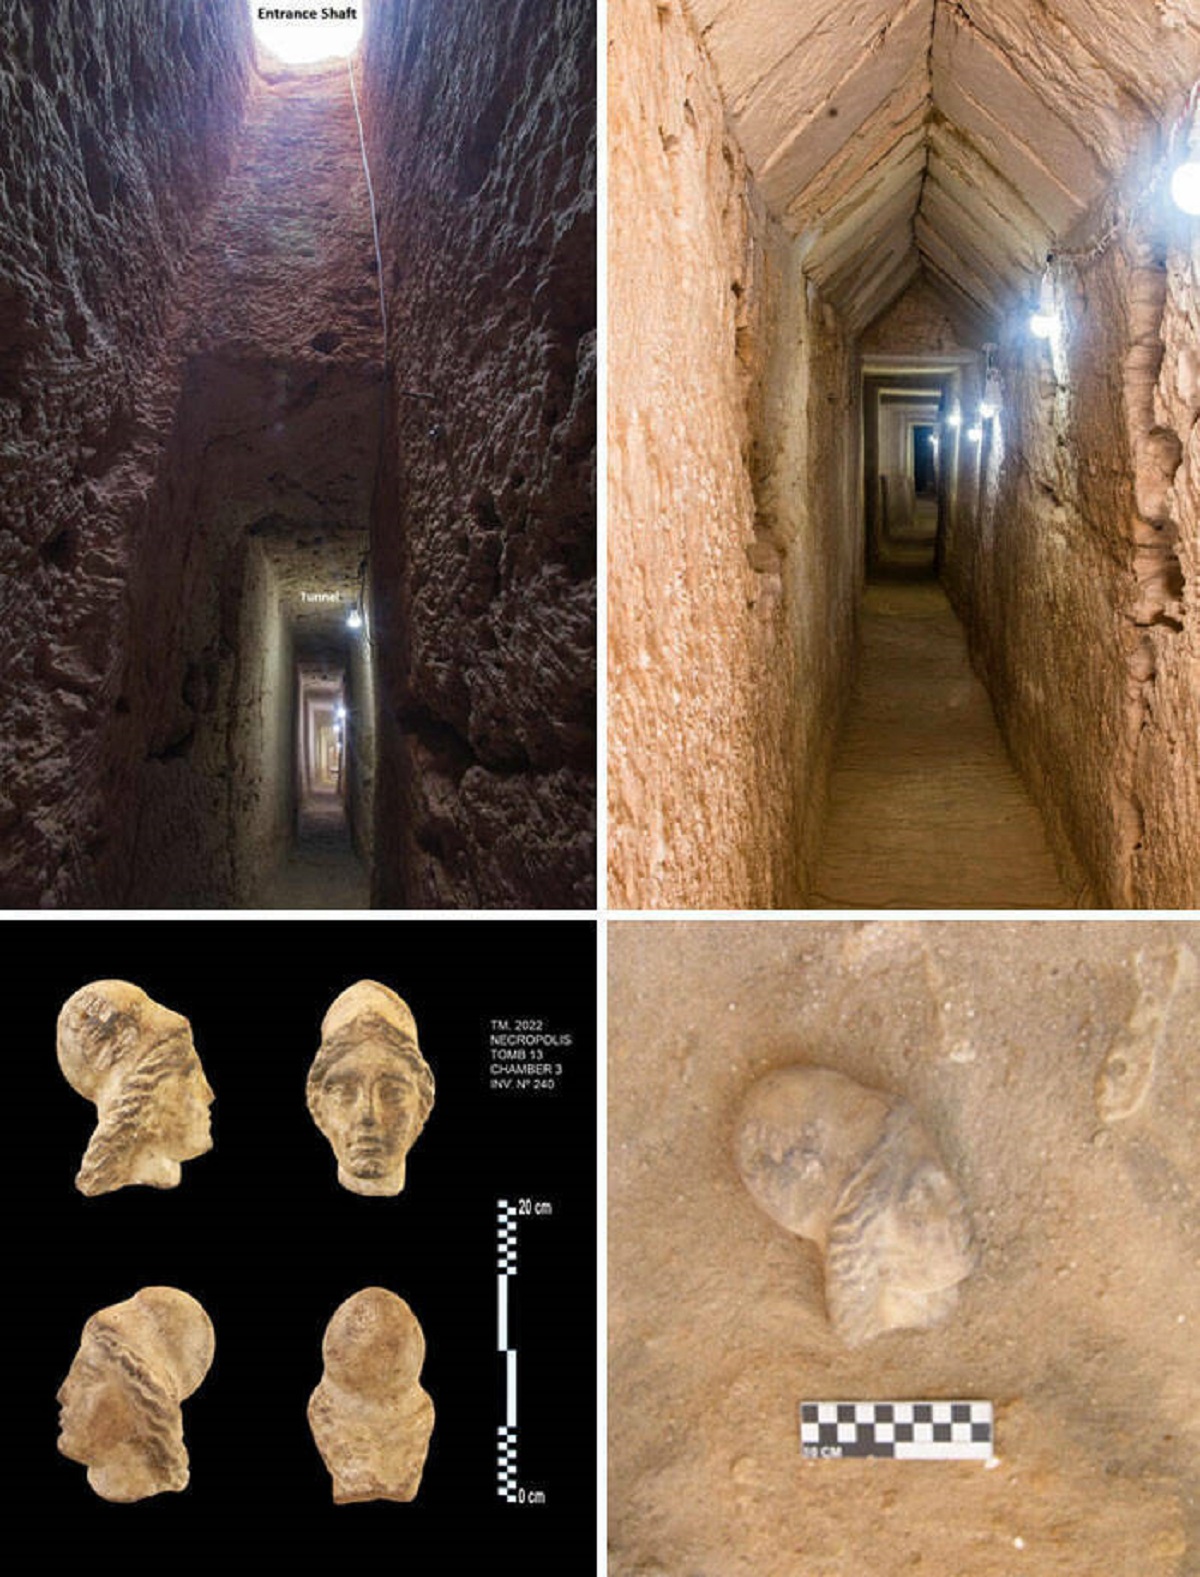 "Archaeologists In Alexandria, Egypt Discovered A Tunnel That May Lead To The Long-Lost Tomb Of Cleopatra"